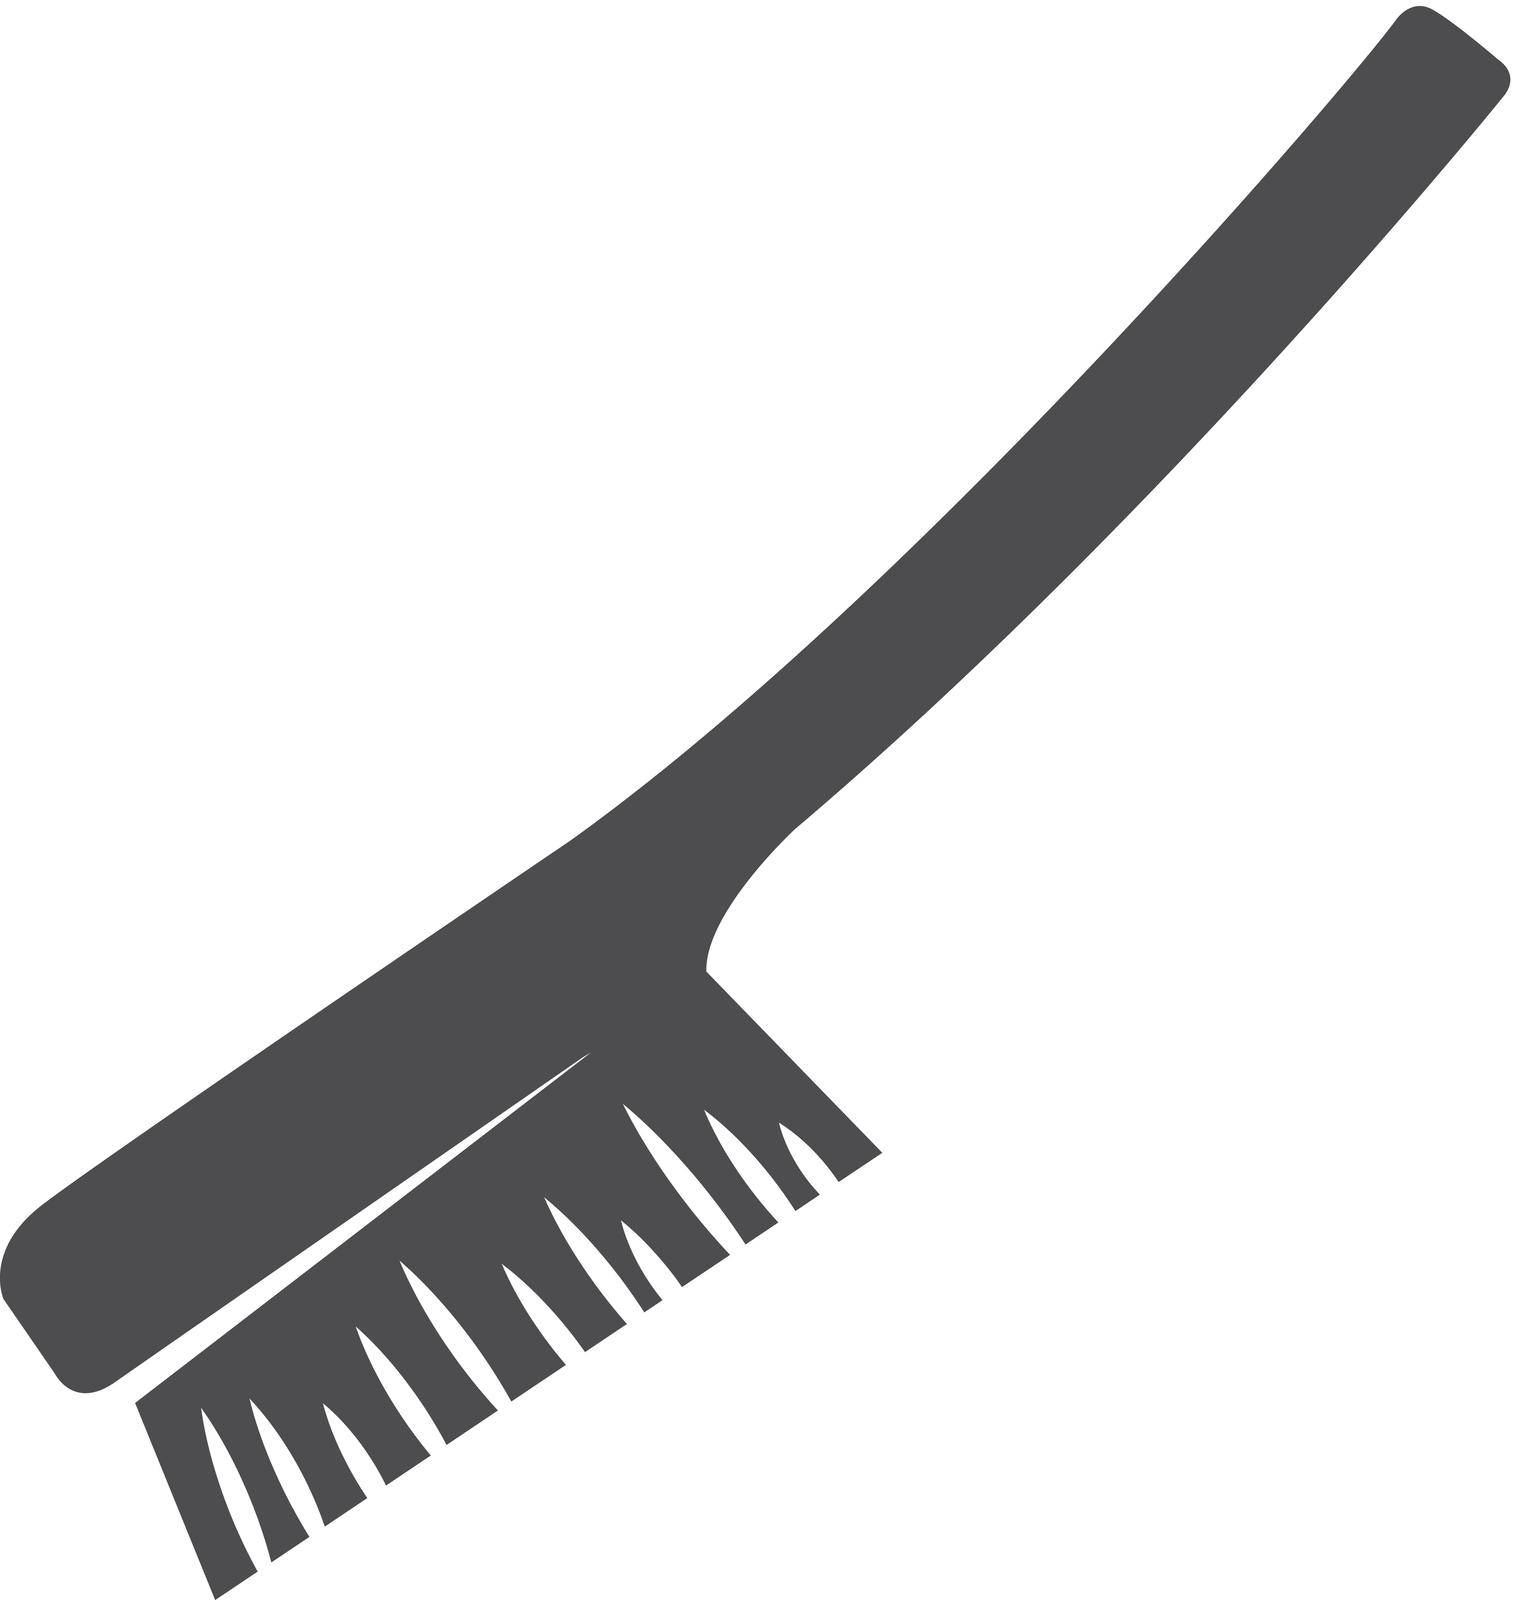 Wire brush icon in single color. Industrial repair tool. Vector illustration.